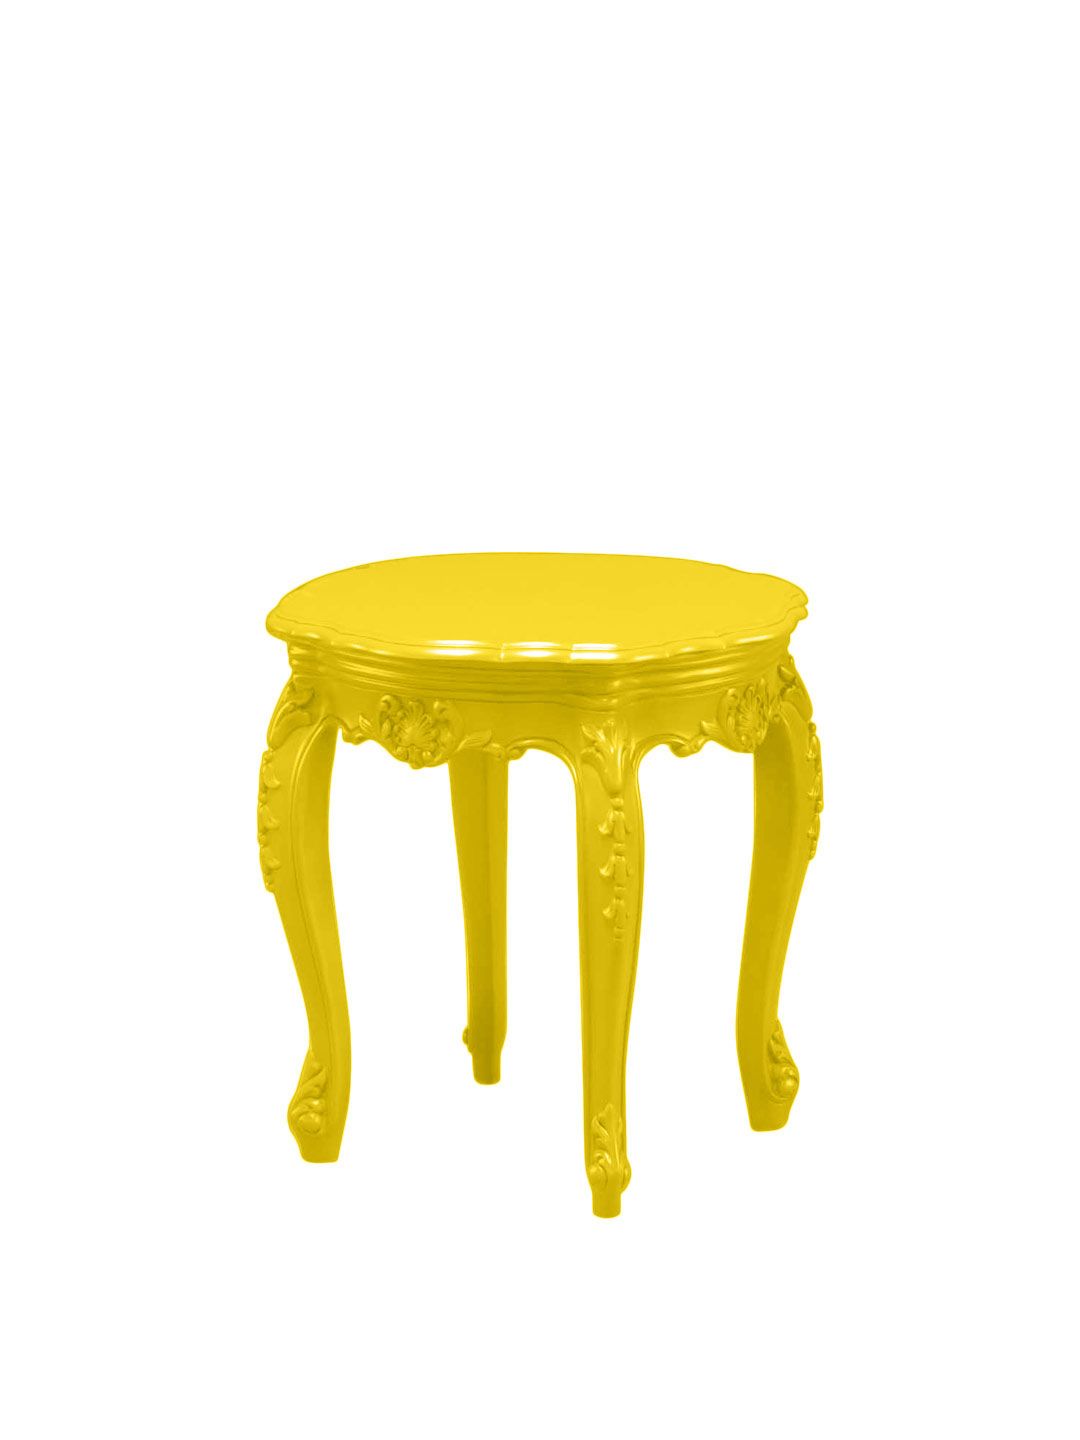 yellow outdoor side table polart beautiful headboards small decorative storage cabinets round dining with leaf teal wall clock industrial cart coffee barn door dark end tables